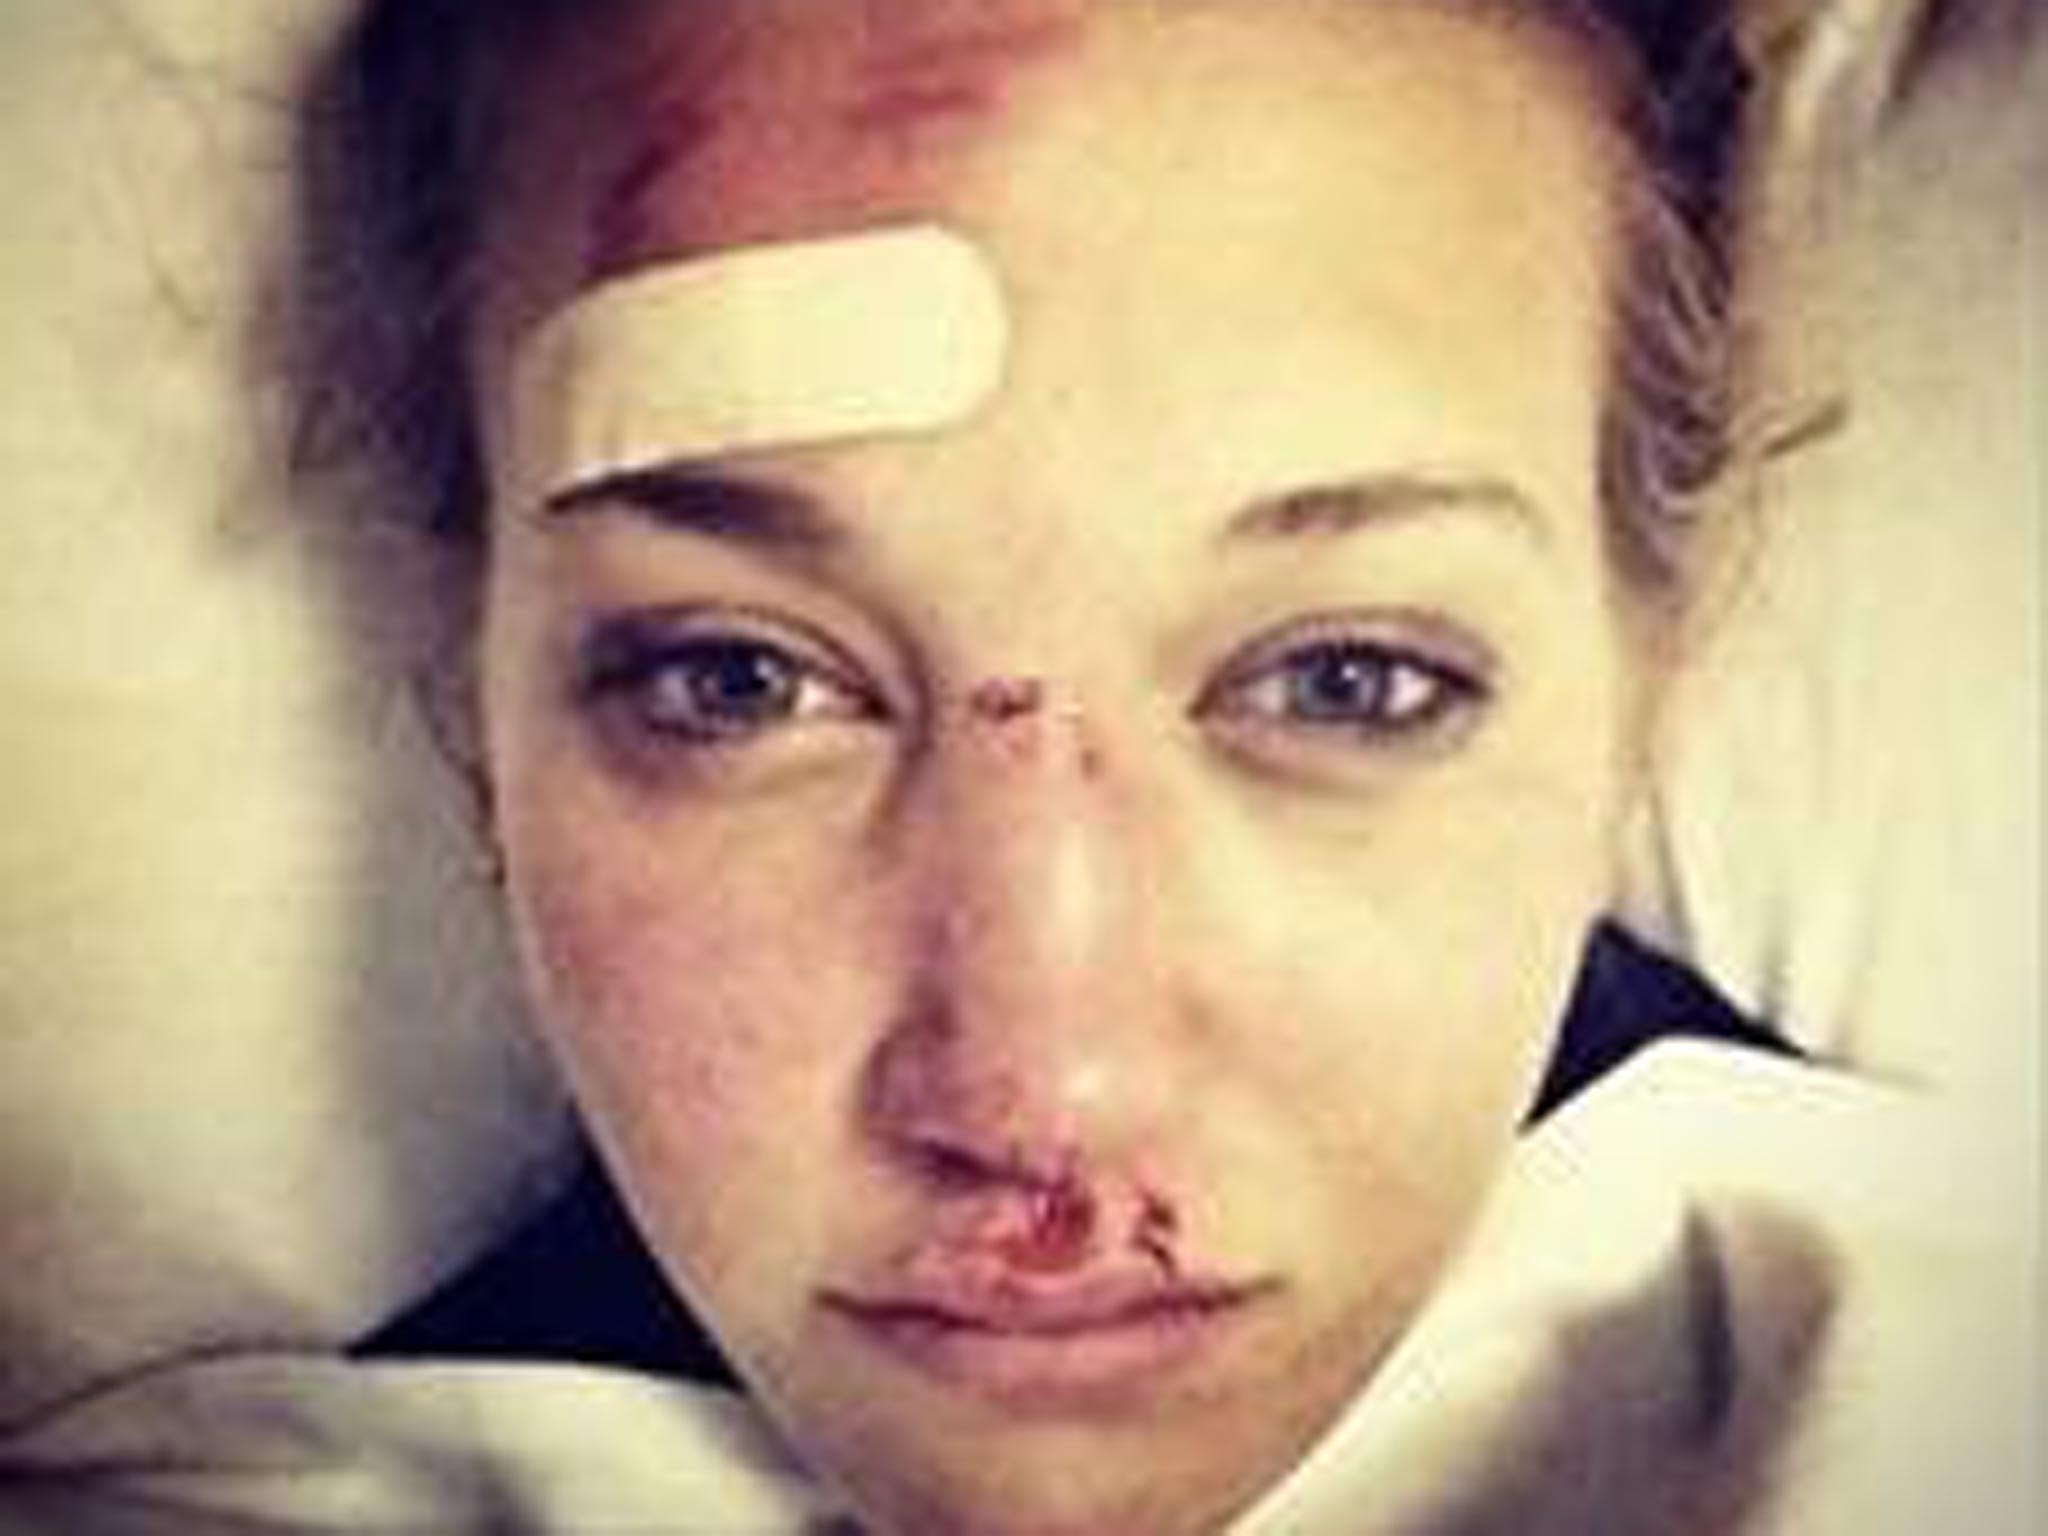 Rowan Cheshire posted this picture of her injuries on Twitter yesterday